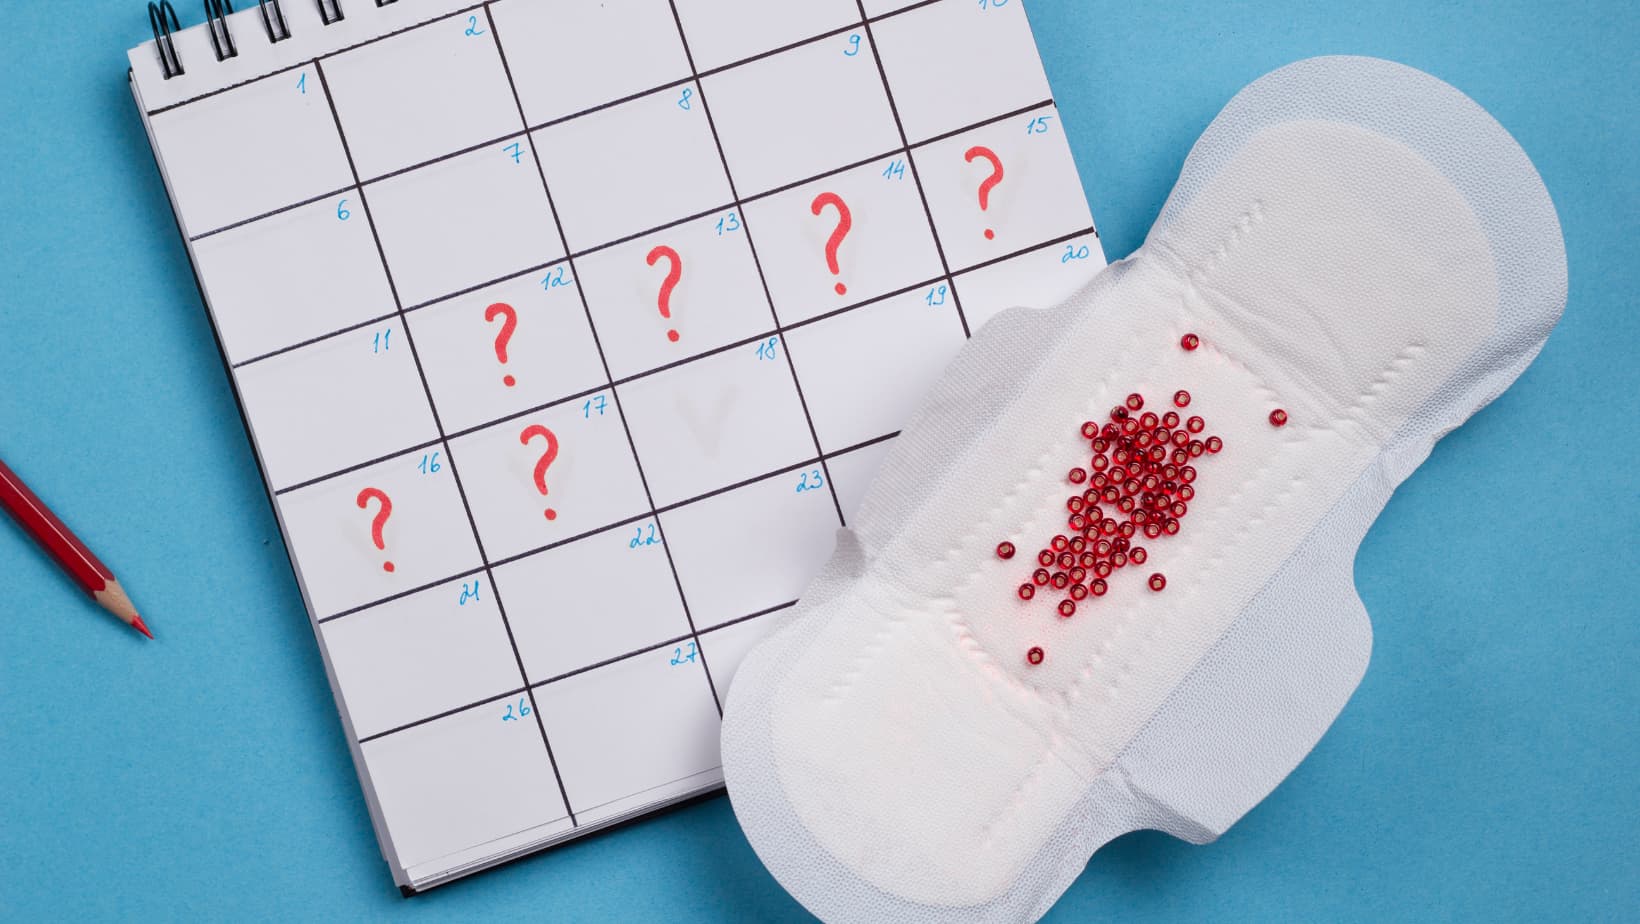 Is getting an STI test in your period recommended?